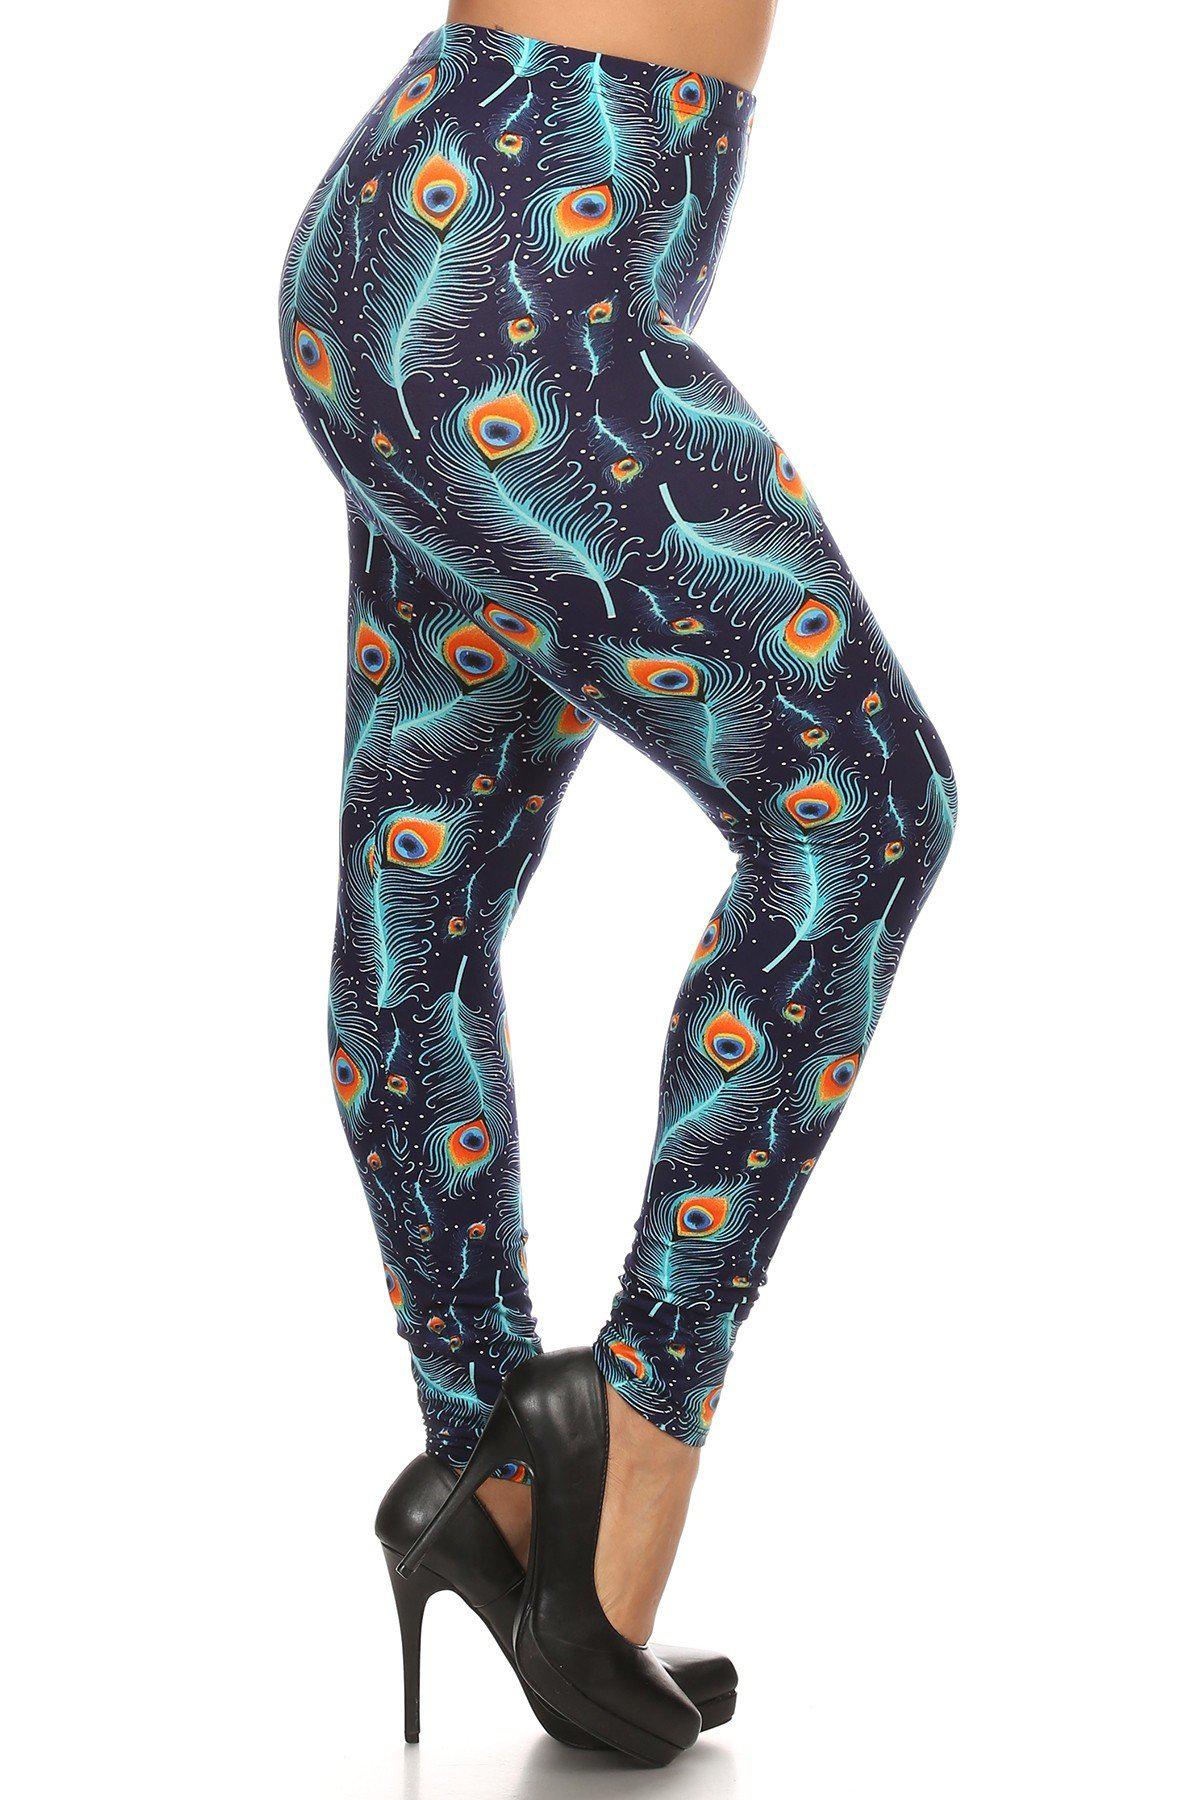 Plus Size Print, Full Length Leggings In A Slim Fitting Style With A Banded High Waist-[Adult]-[Female]-Multi-Blue Zone Planet